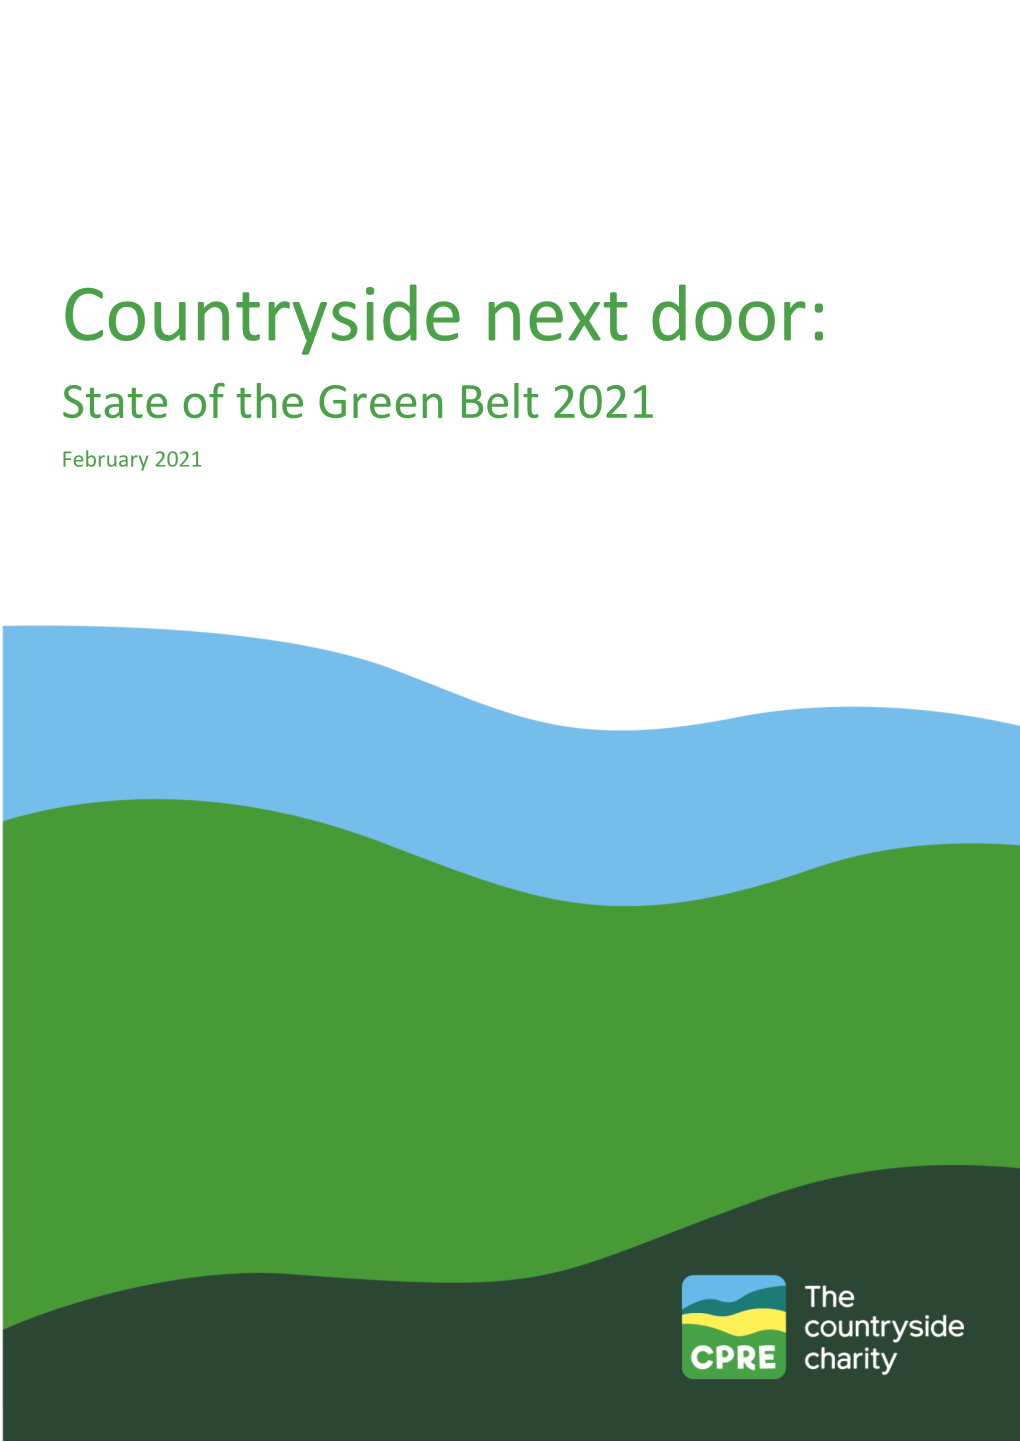 CPRE – Countryside Next Door: State of the Green Belt 2021